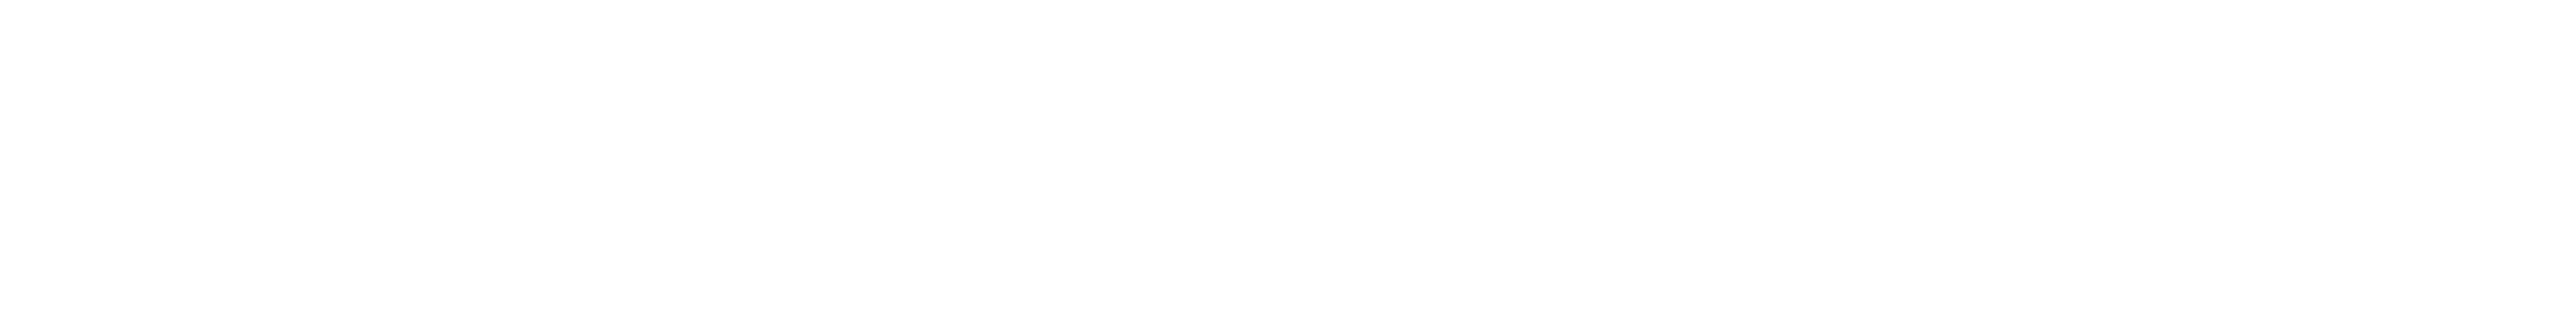 Logos for Covenant Health